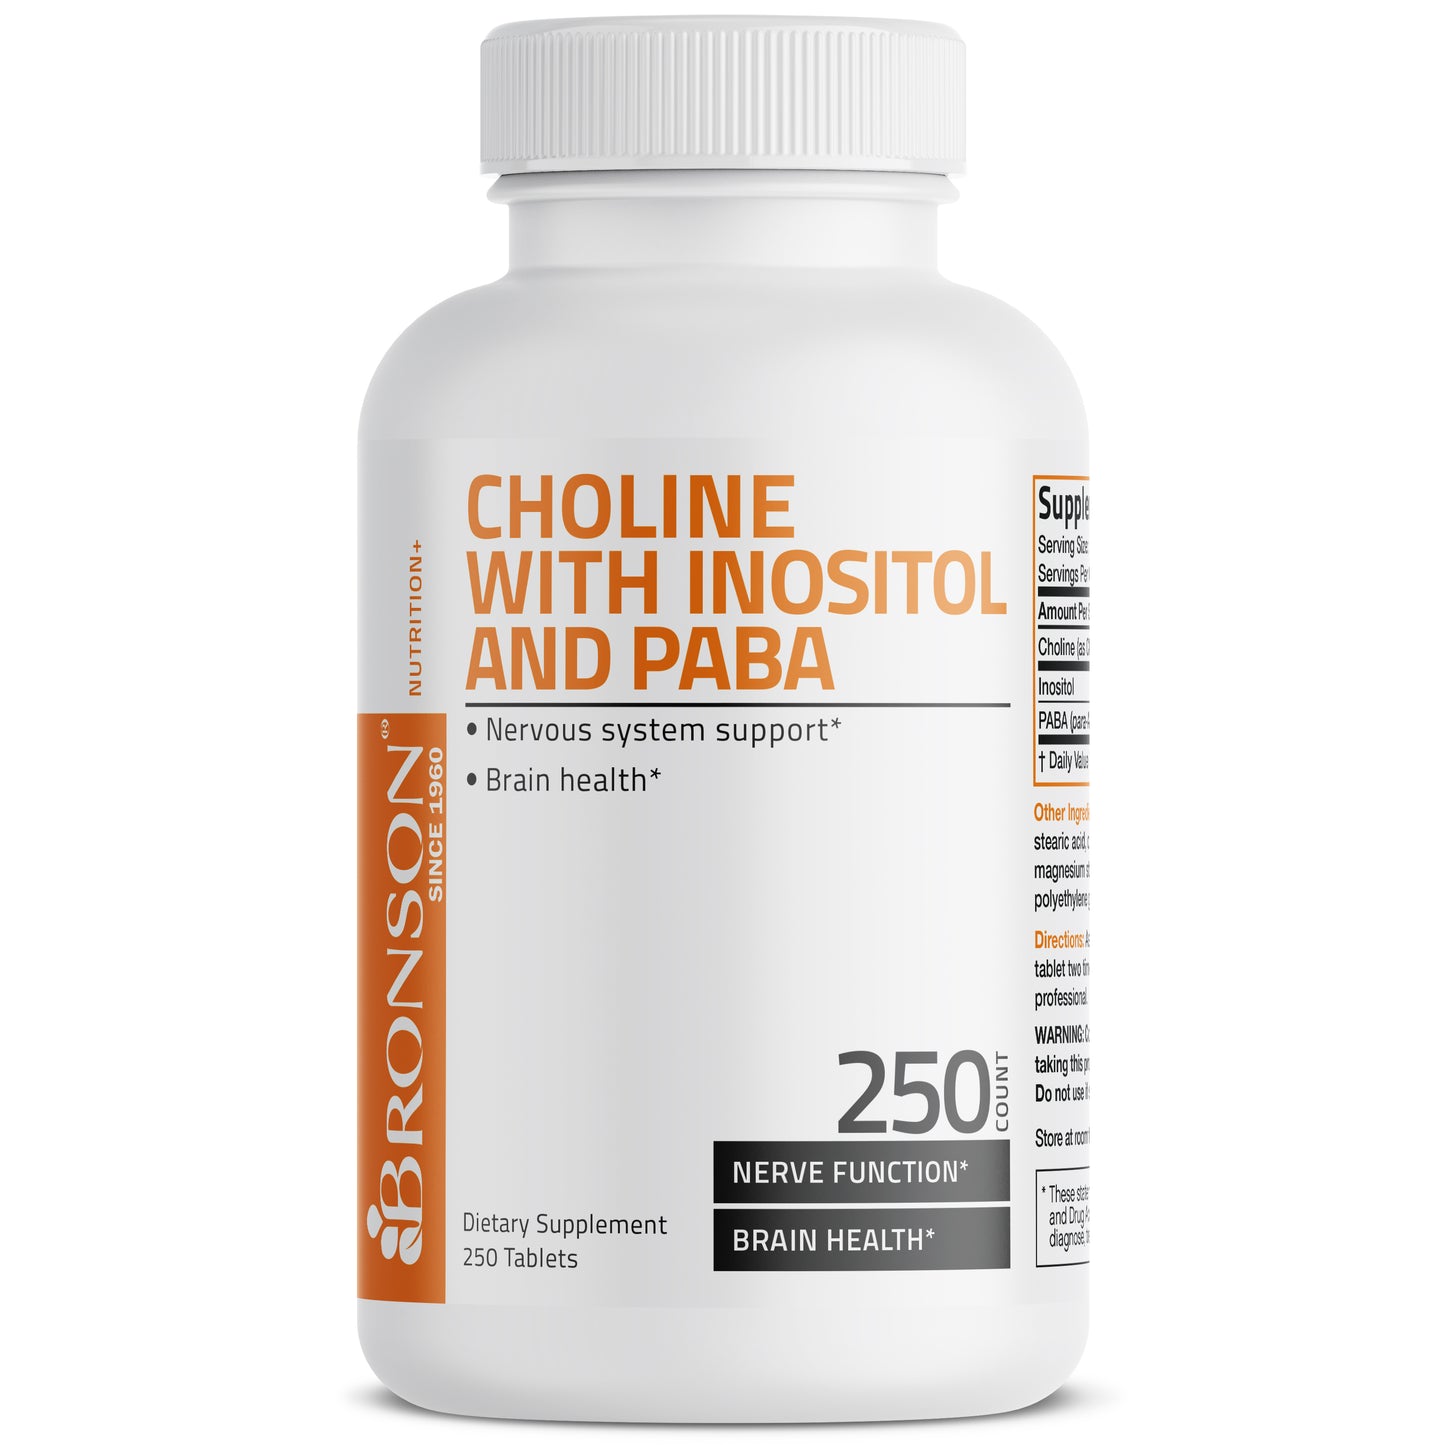 Choline with Inositol and Paba - 250 Tablets